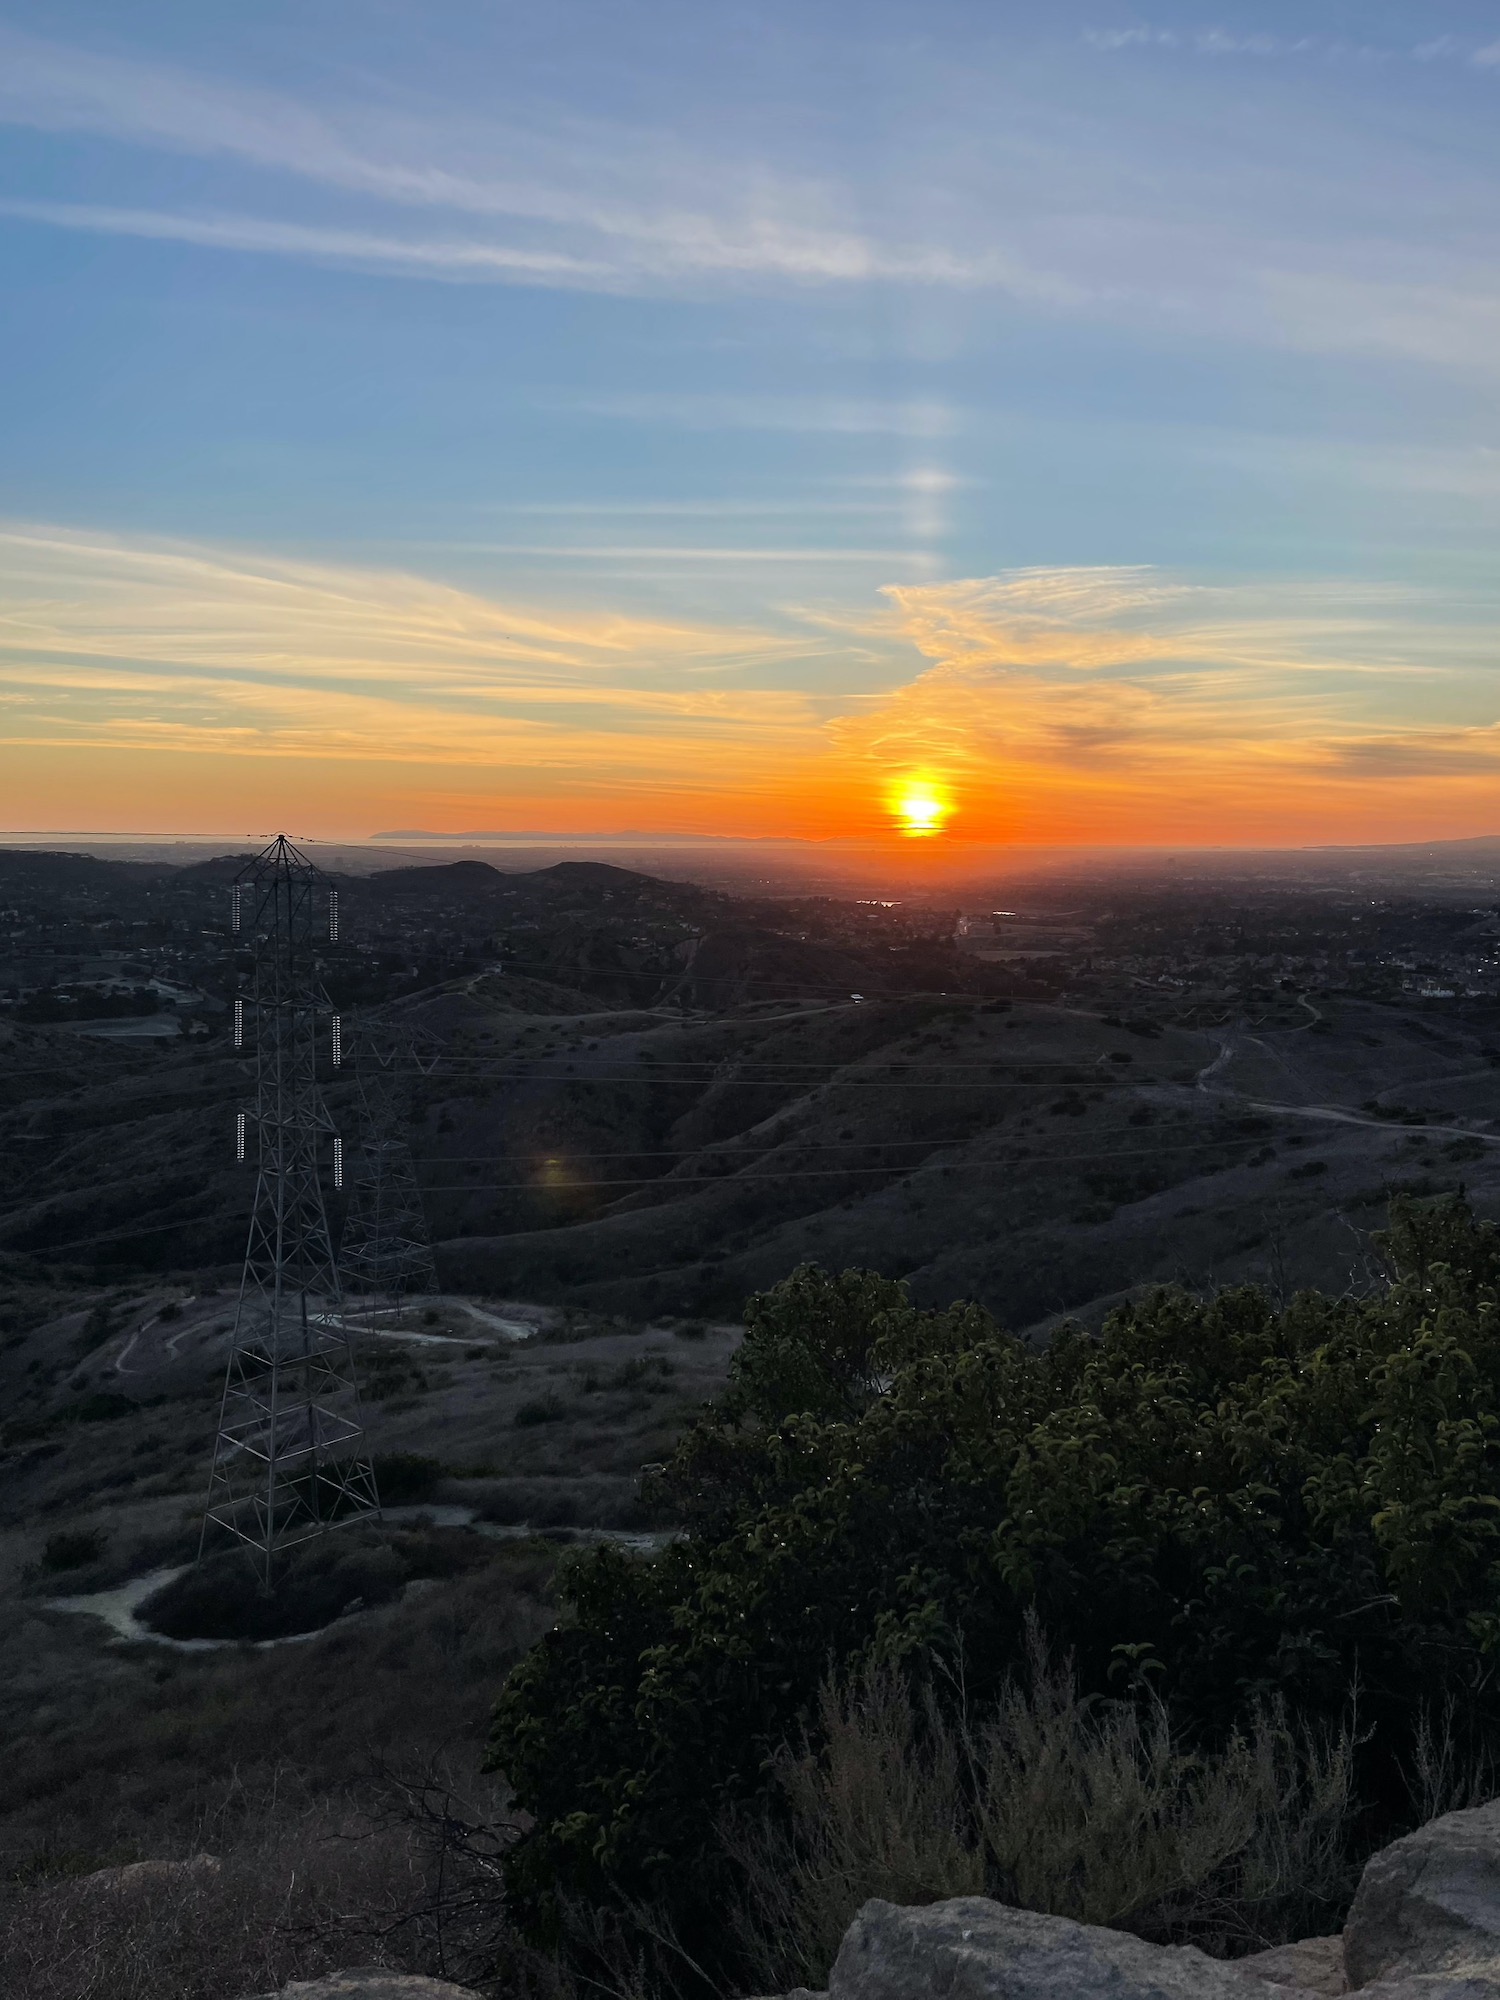 Sunset over pacific ocean - robbers roost vantage point - anaheim hills -15